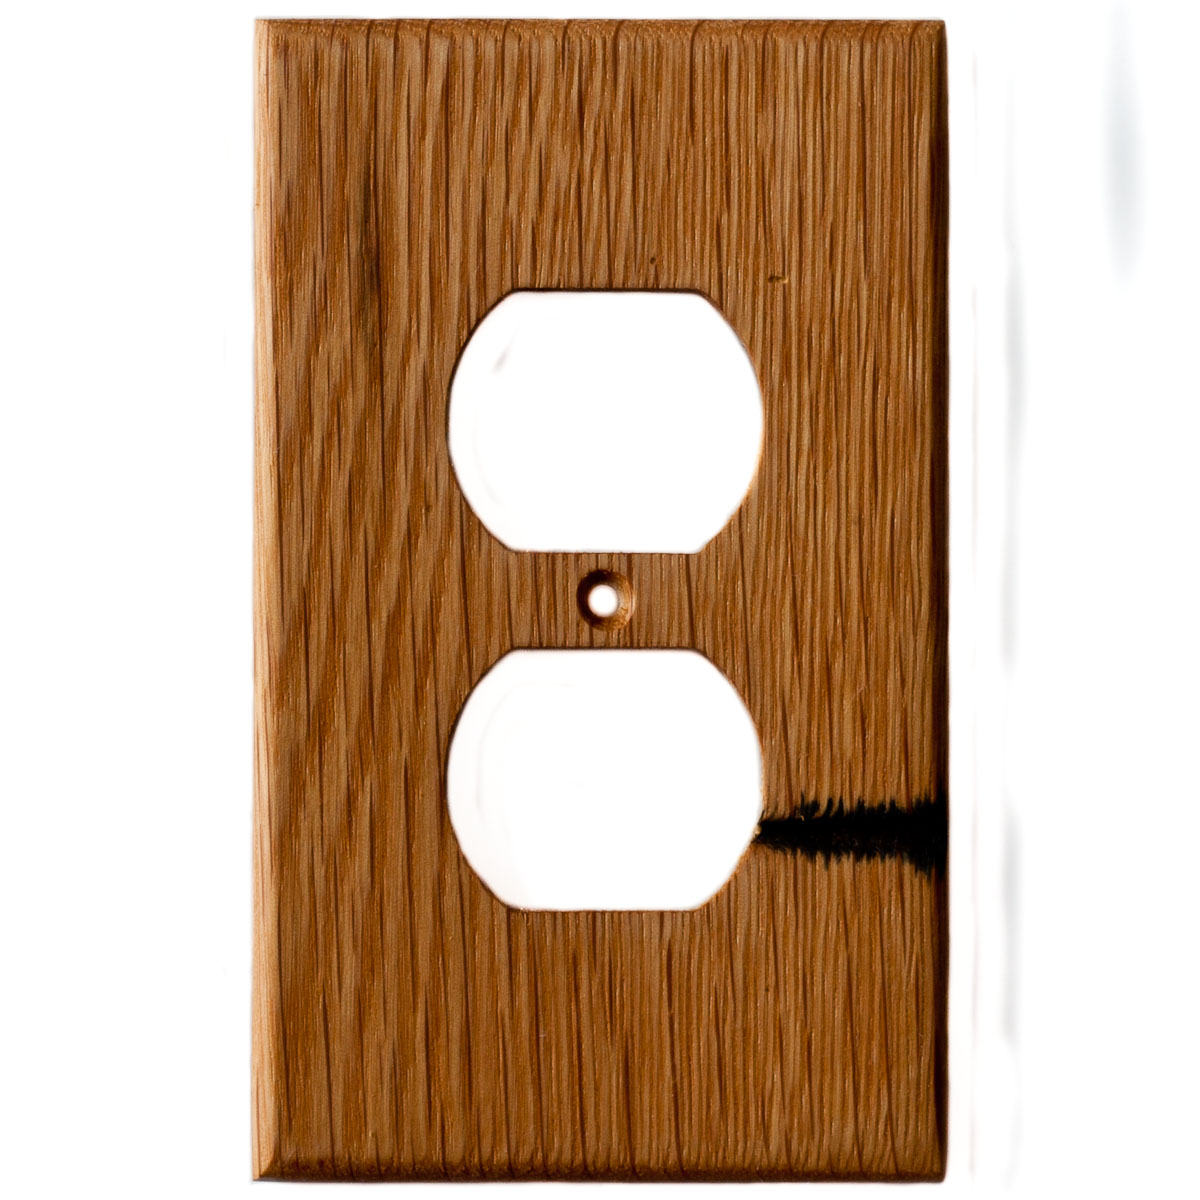 Oak Reclaimed Wood Wall Plate - 1 Gang GFCI Outlet Cover - Virgin